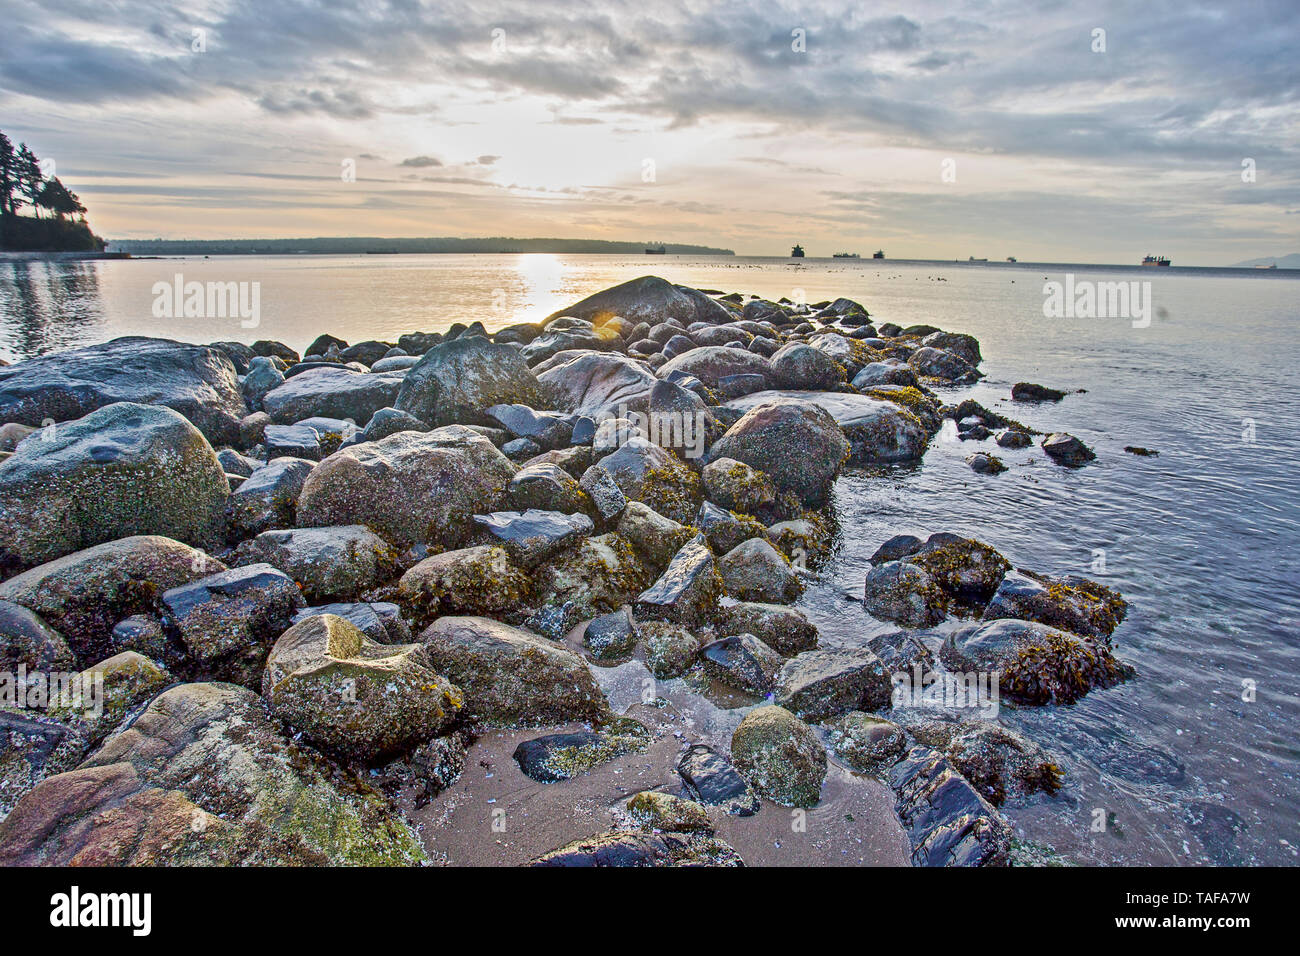 Rocks on the beach at sunset, looking into English Bay in Vancouver, British Columbia, Canada Stock Photo